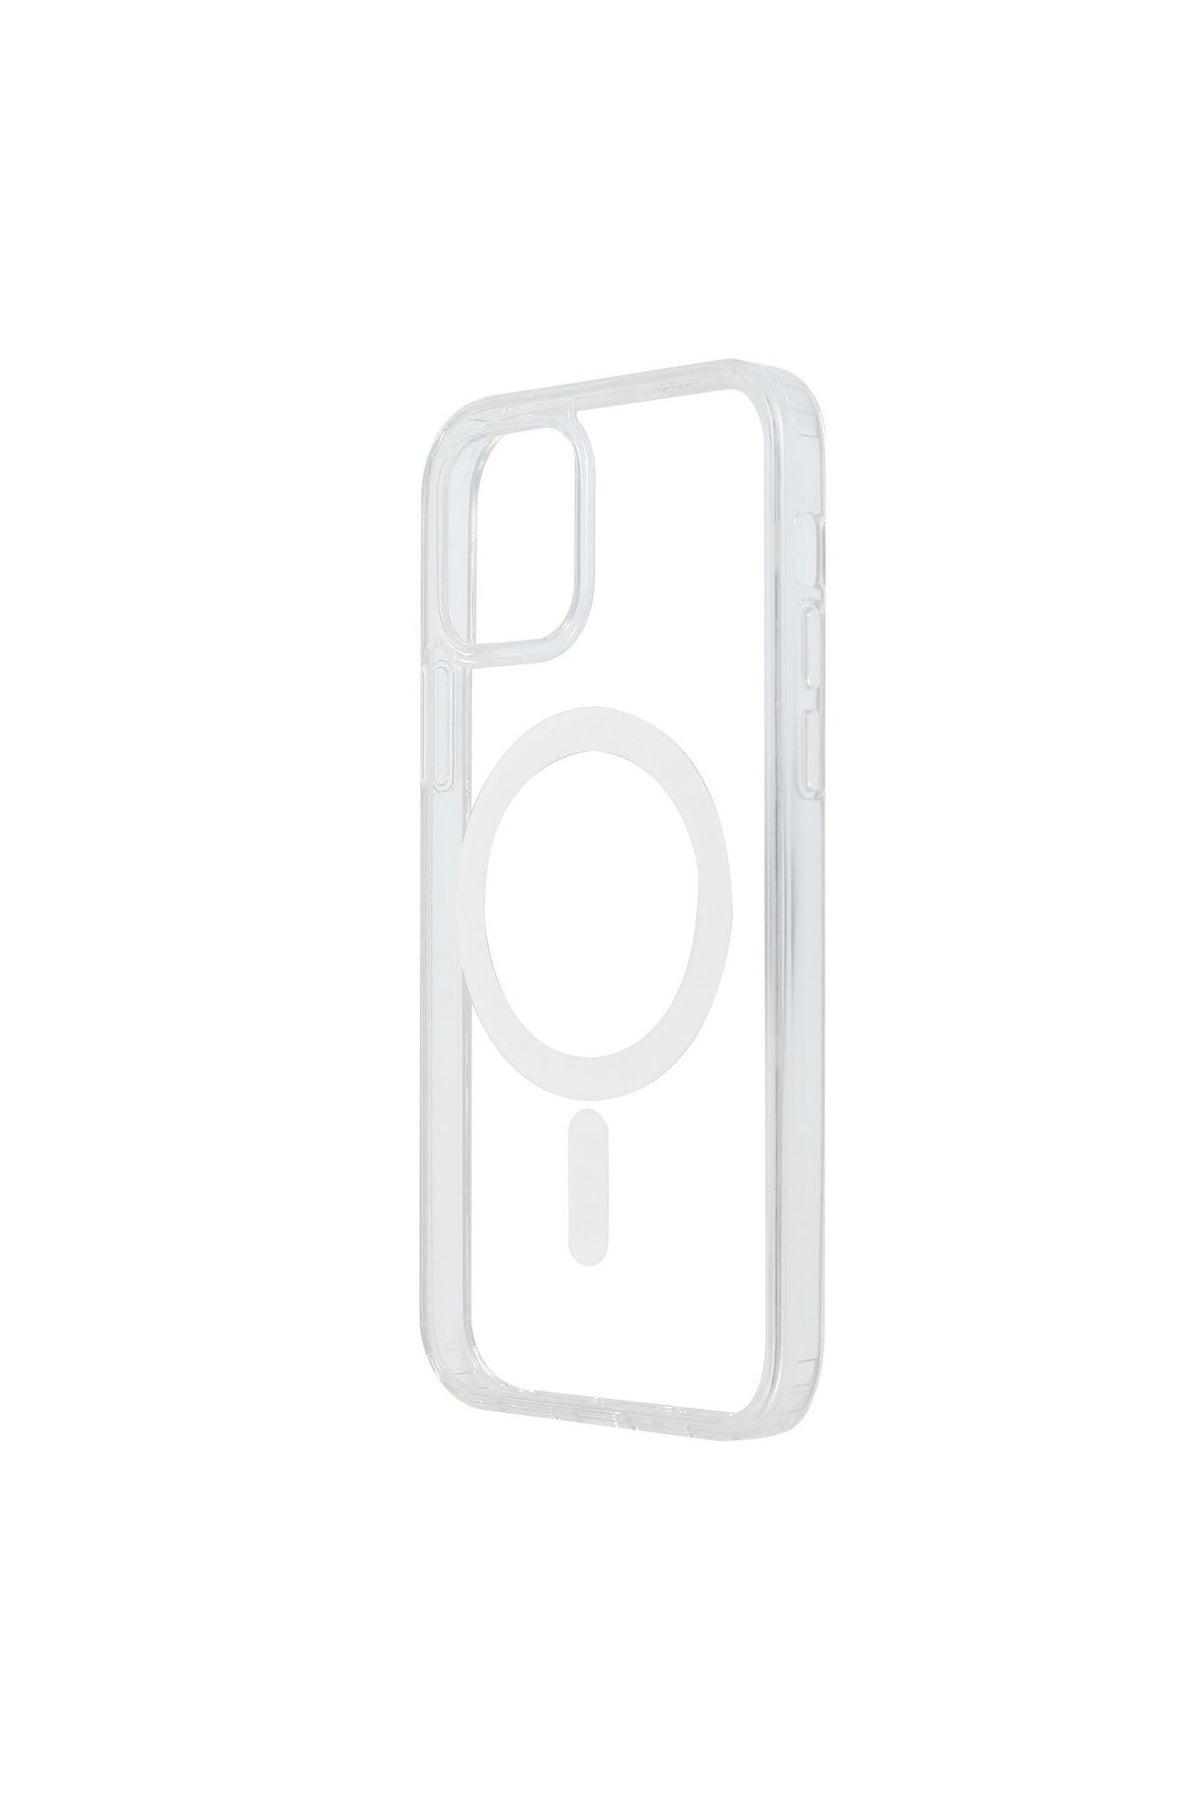 eSTUFF BERLIN Magnetic Hybrid mobile phone case for iPhone 12 / 12 Pro in Clear